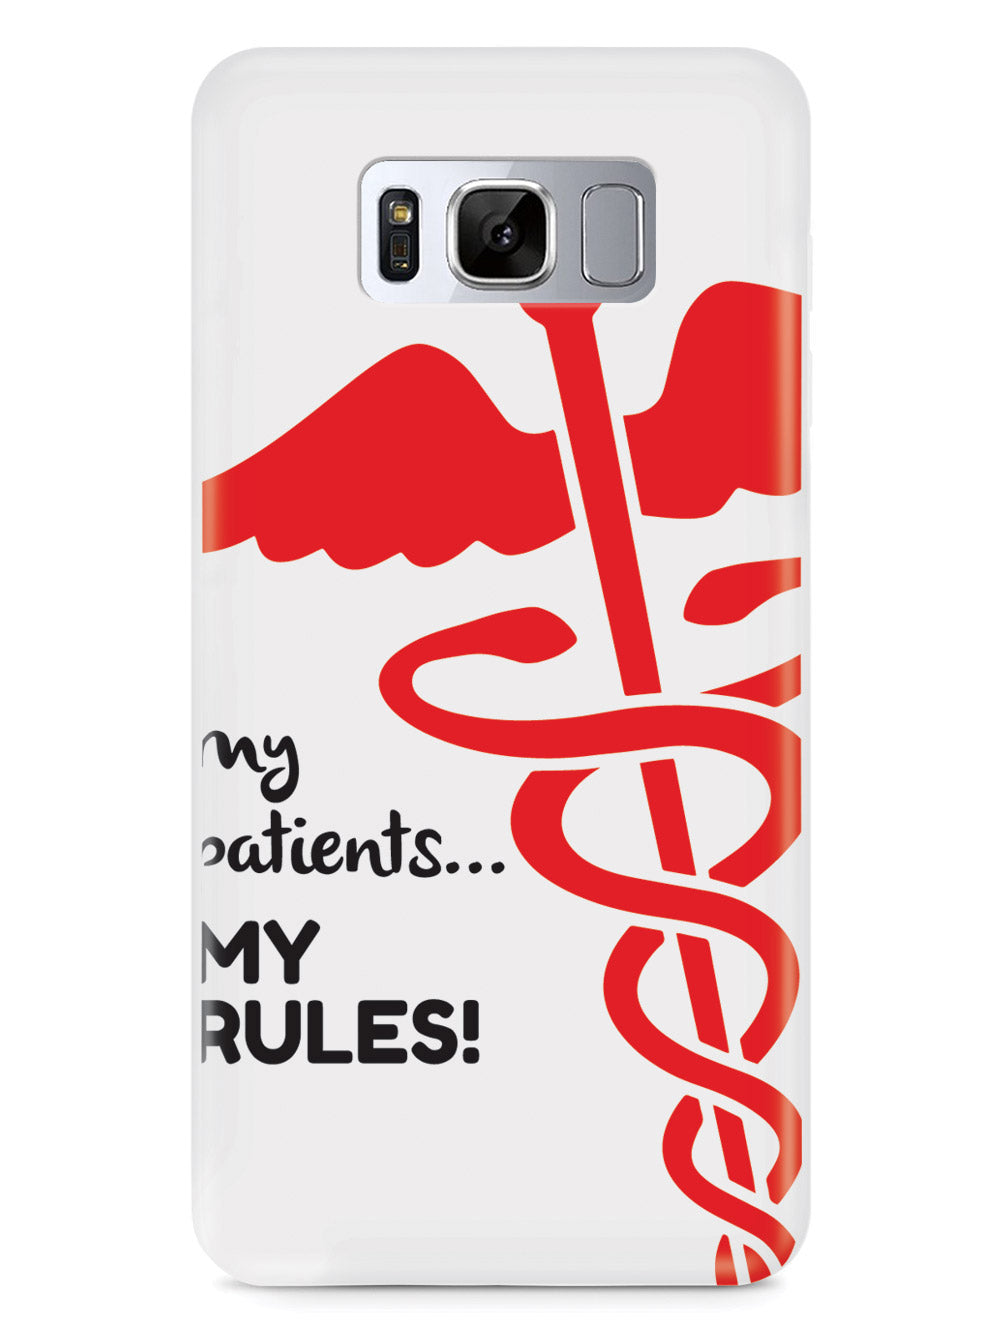 My Patients, My Rules! RN Registered Nurse Case